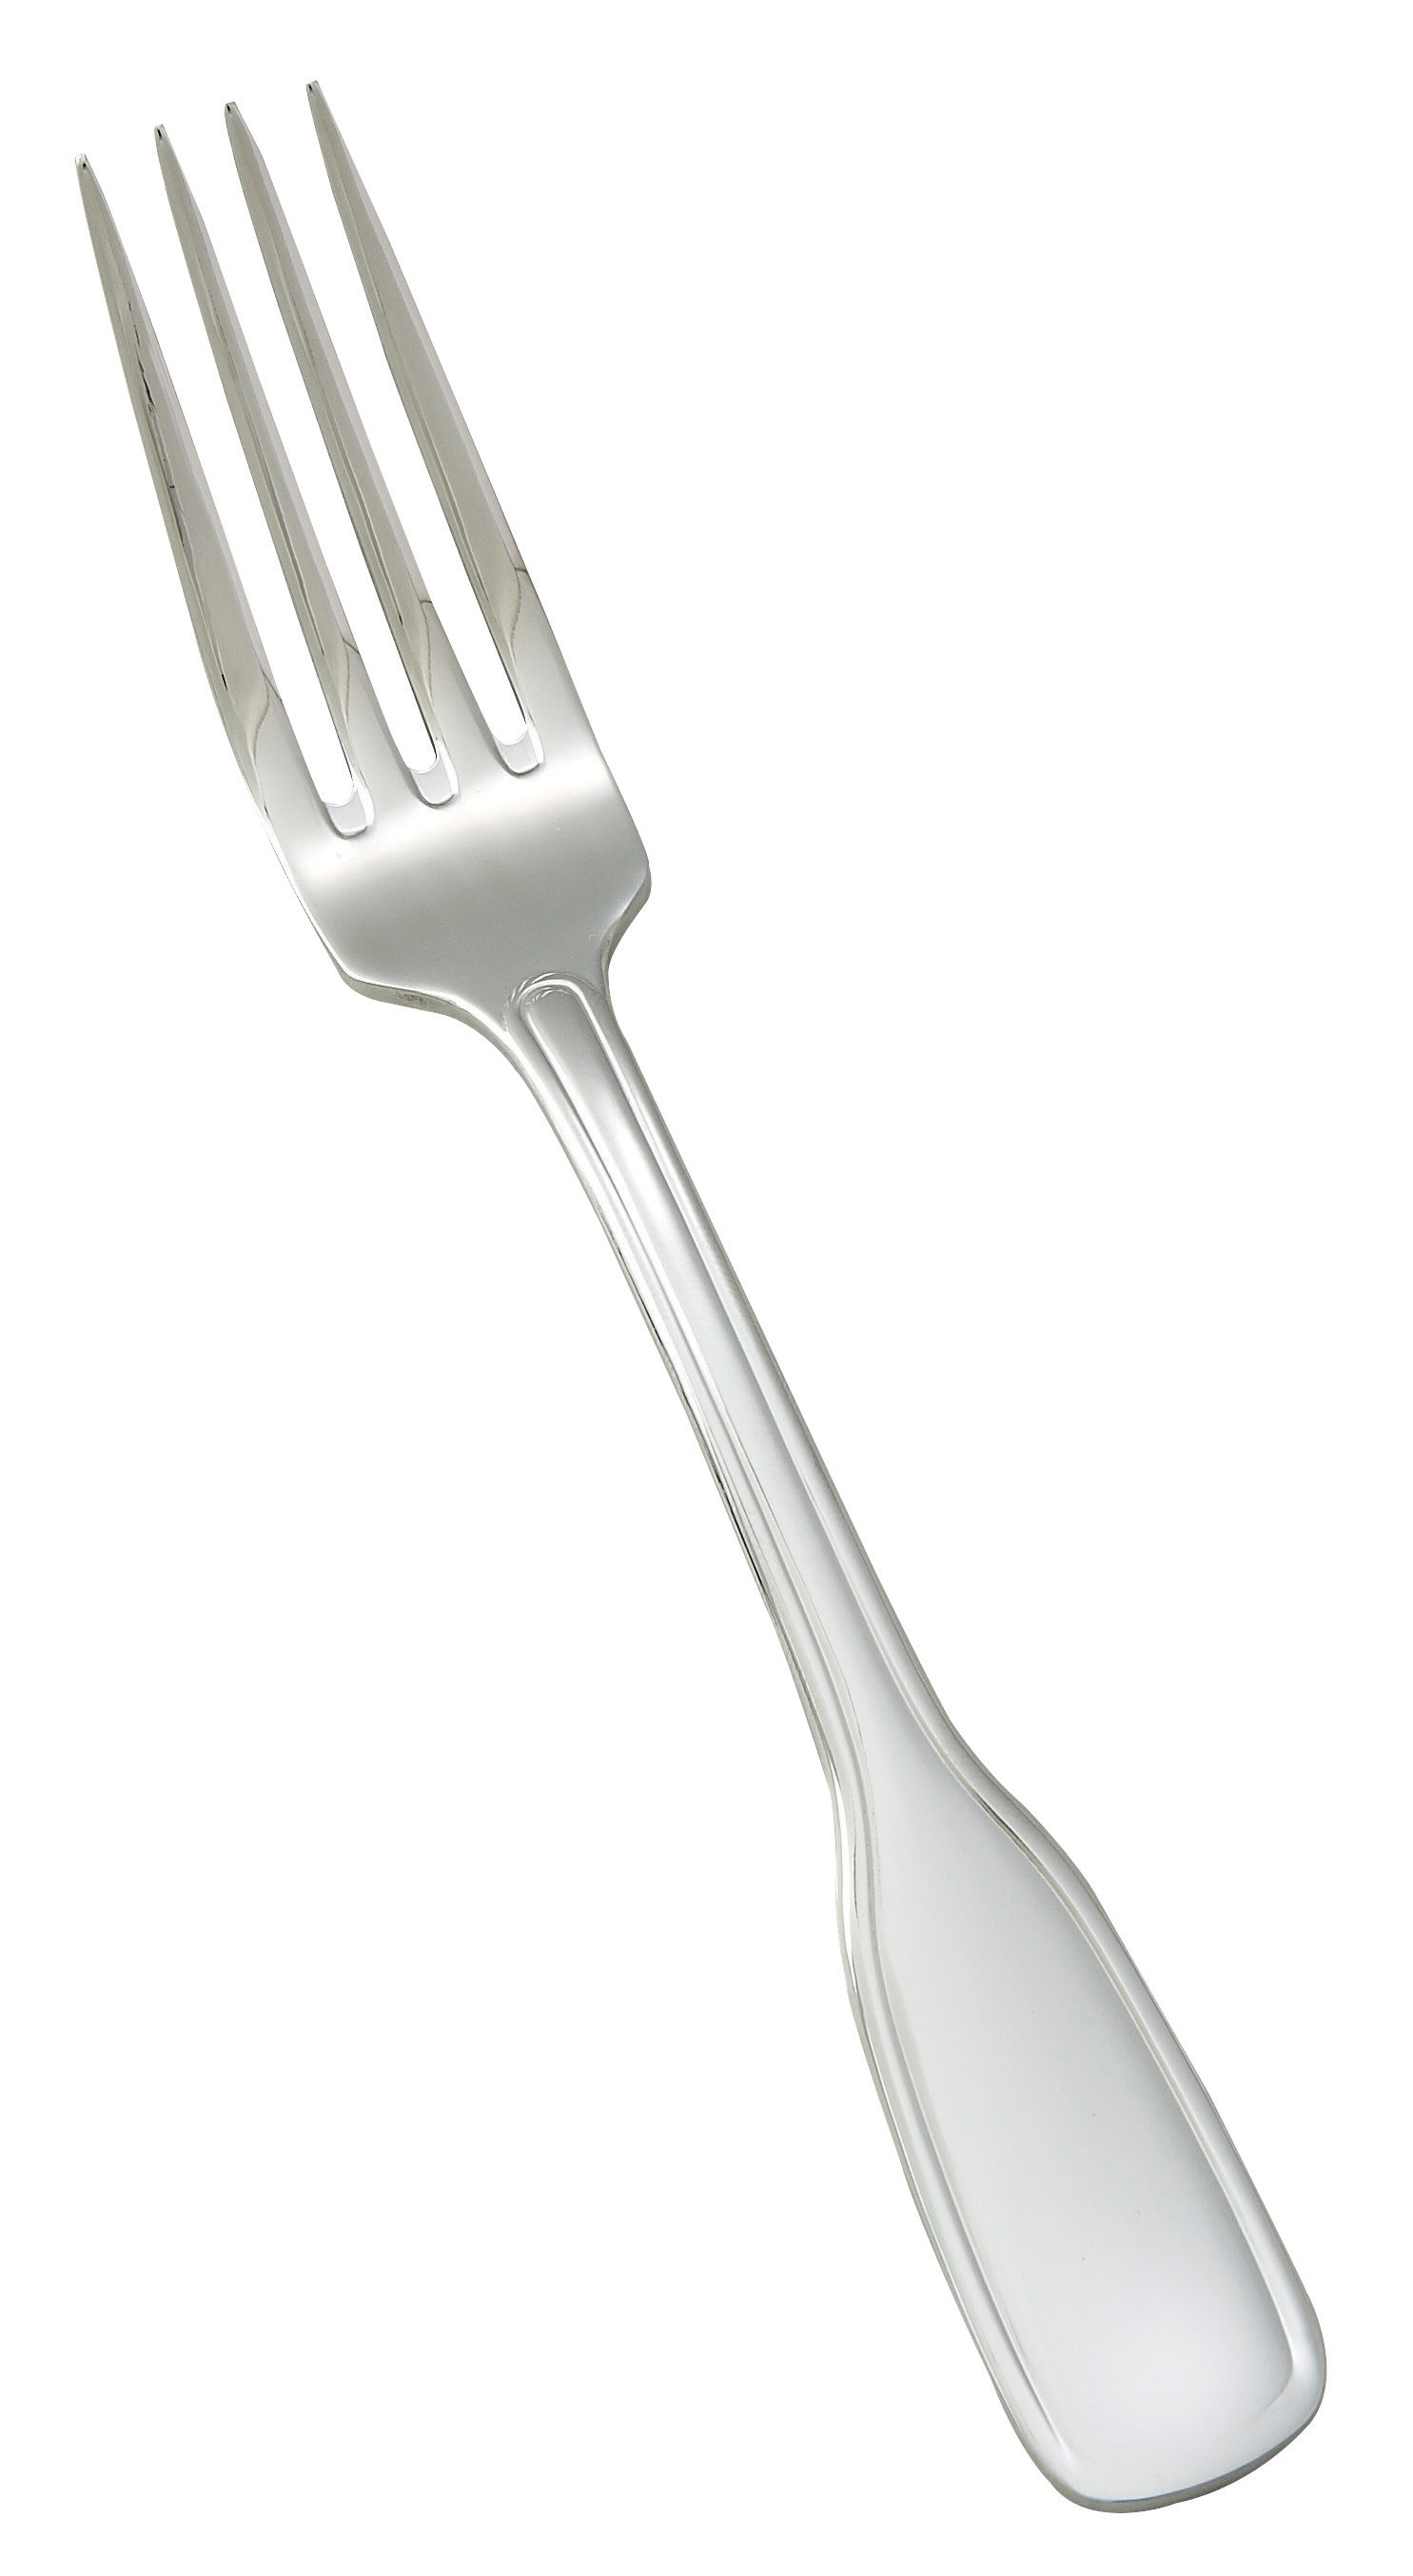 Dinner Fork, 18/8 stainless steel, extra heavy weight,